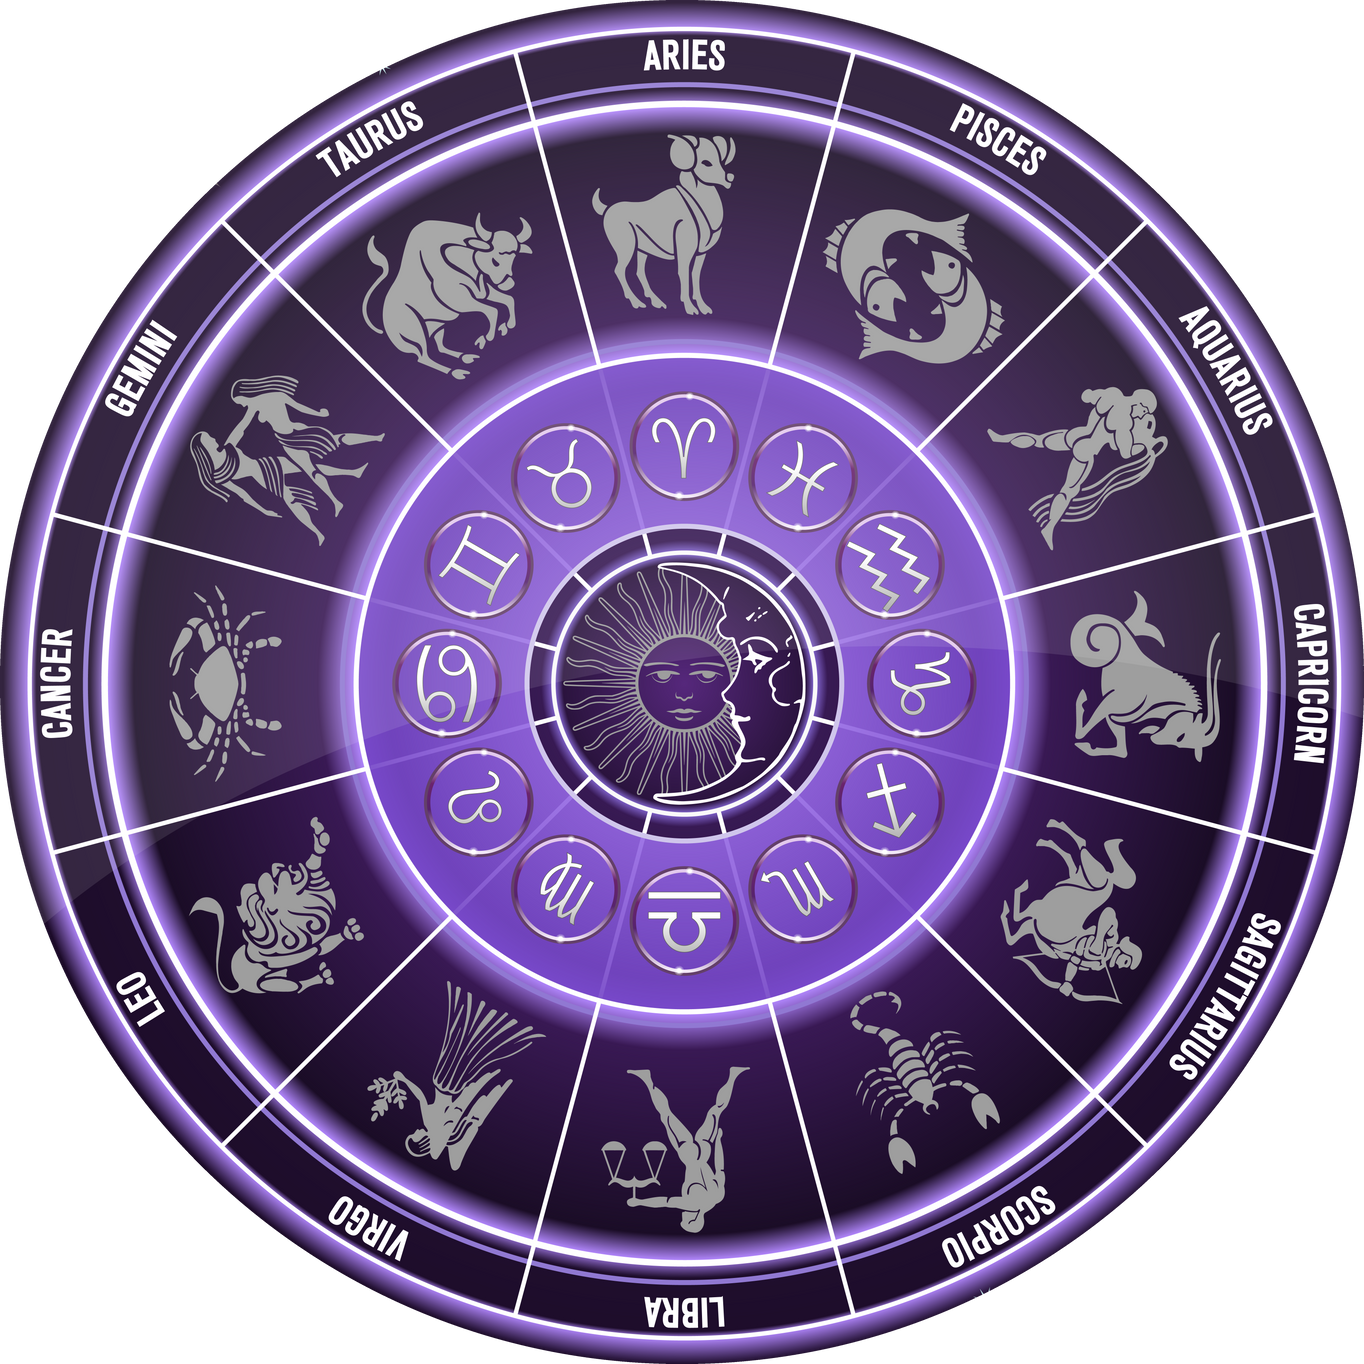 Collection of Horoscopes